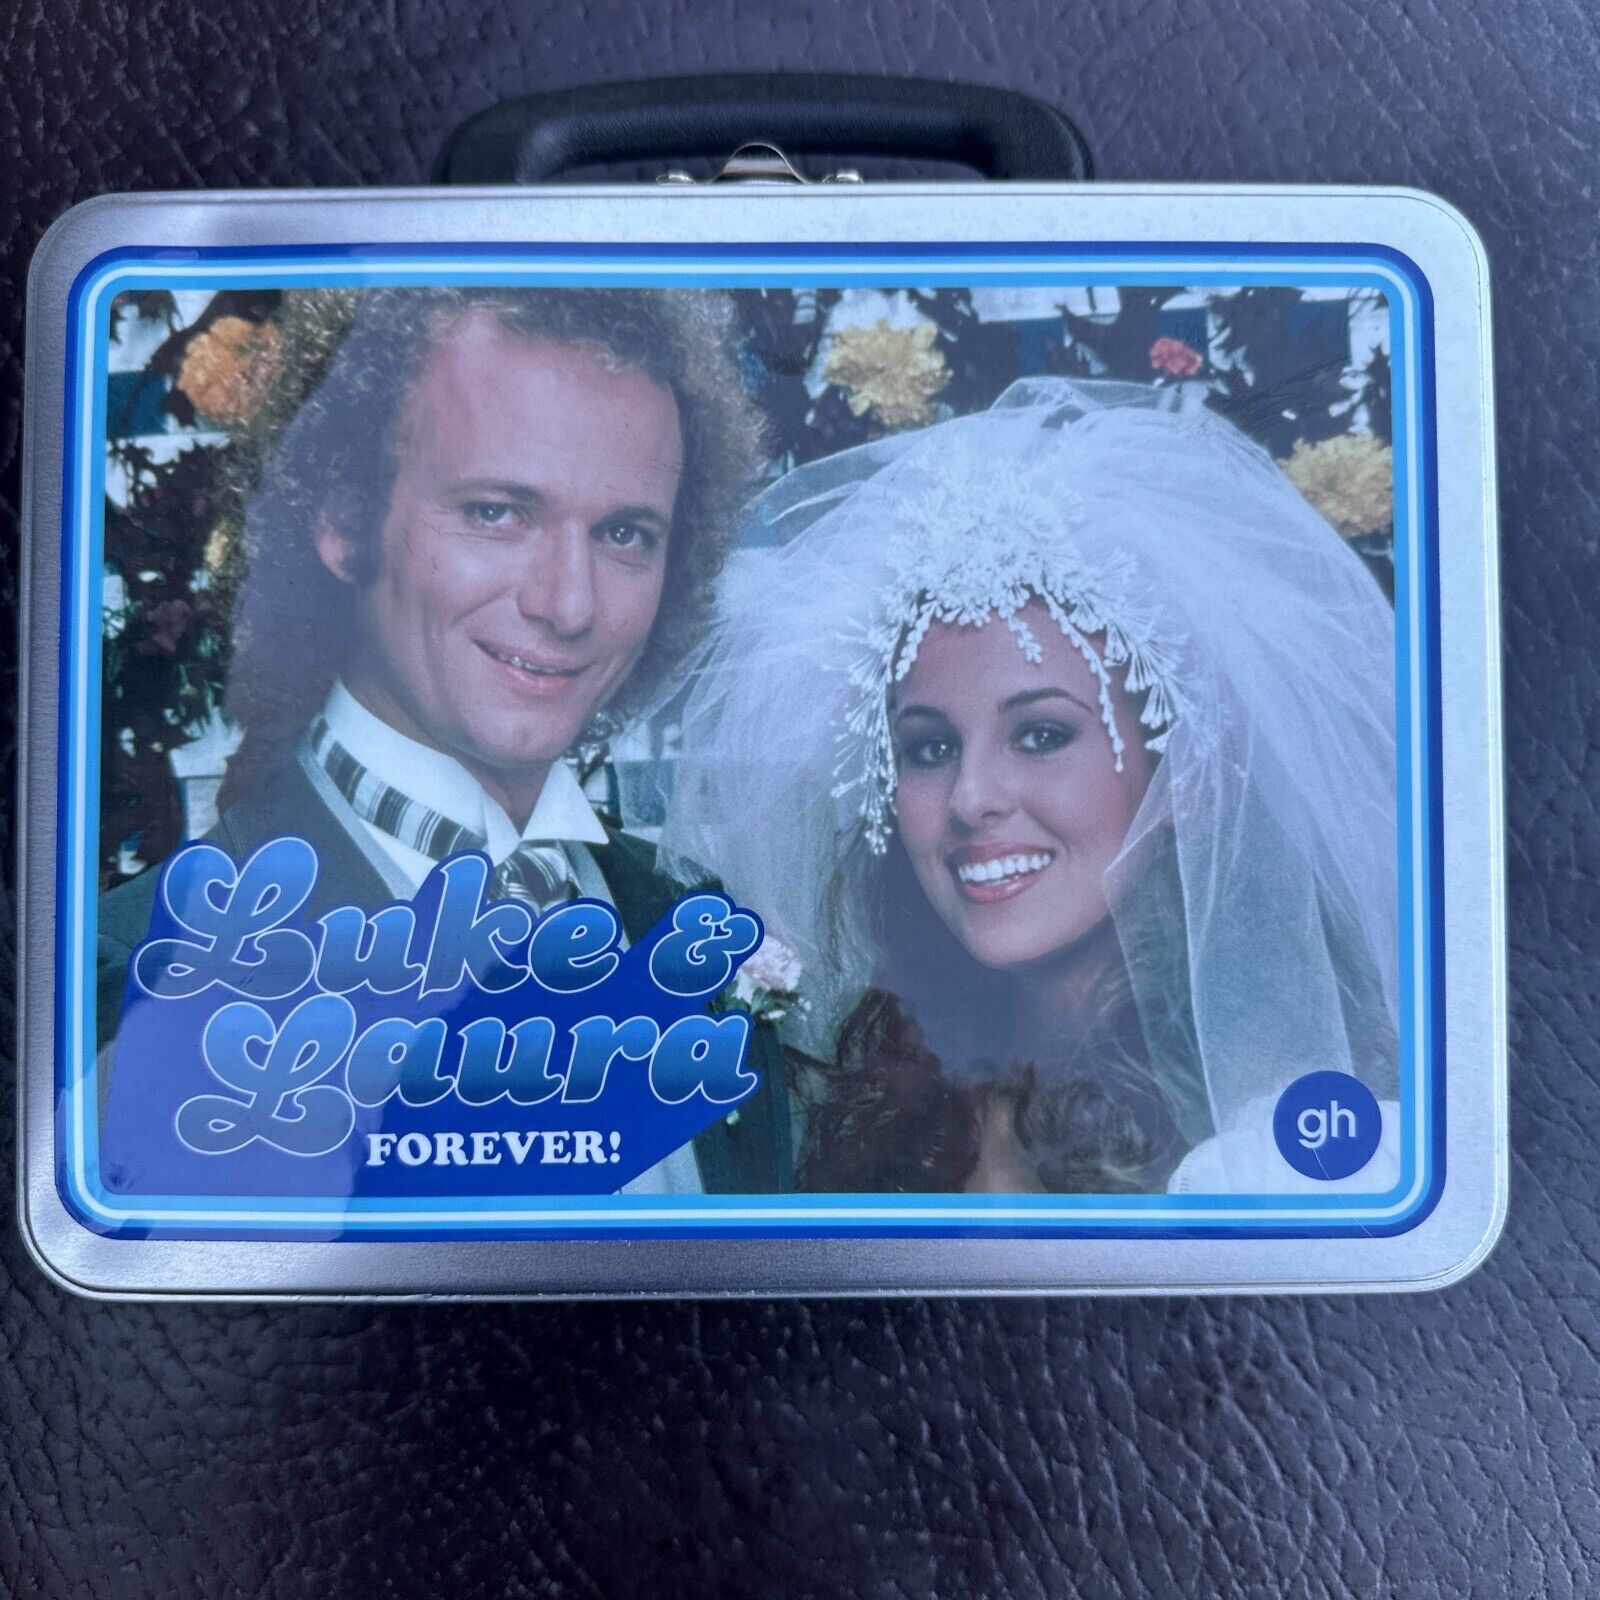 ABC Soap Opera Collector Metal Lunch Box Luke & Laura Forever 1981 Rare Item